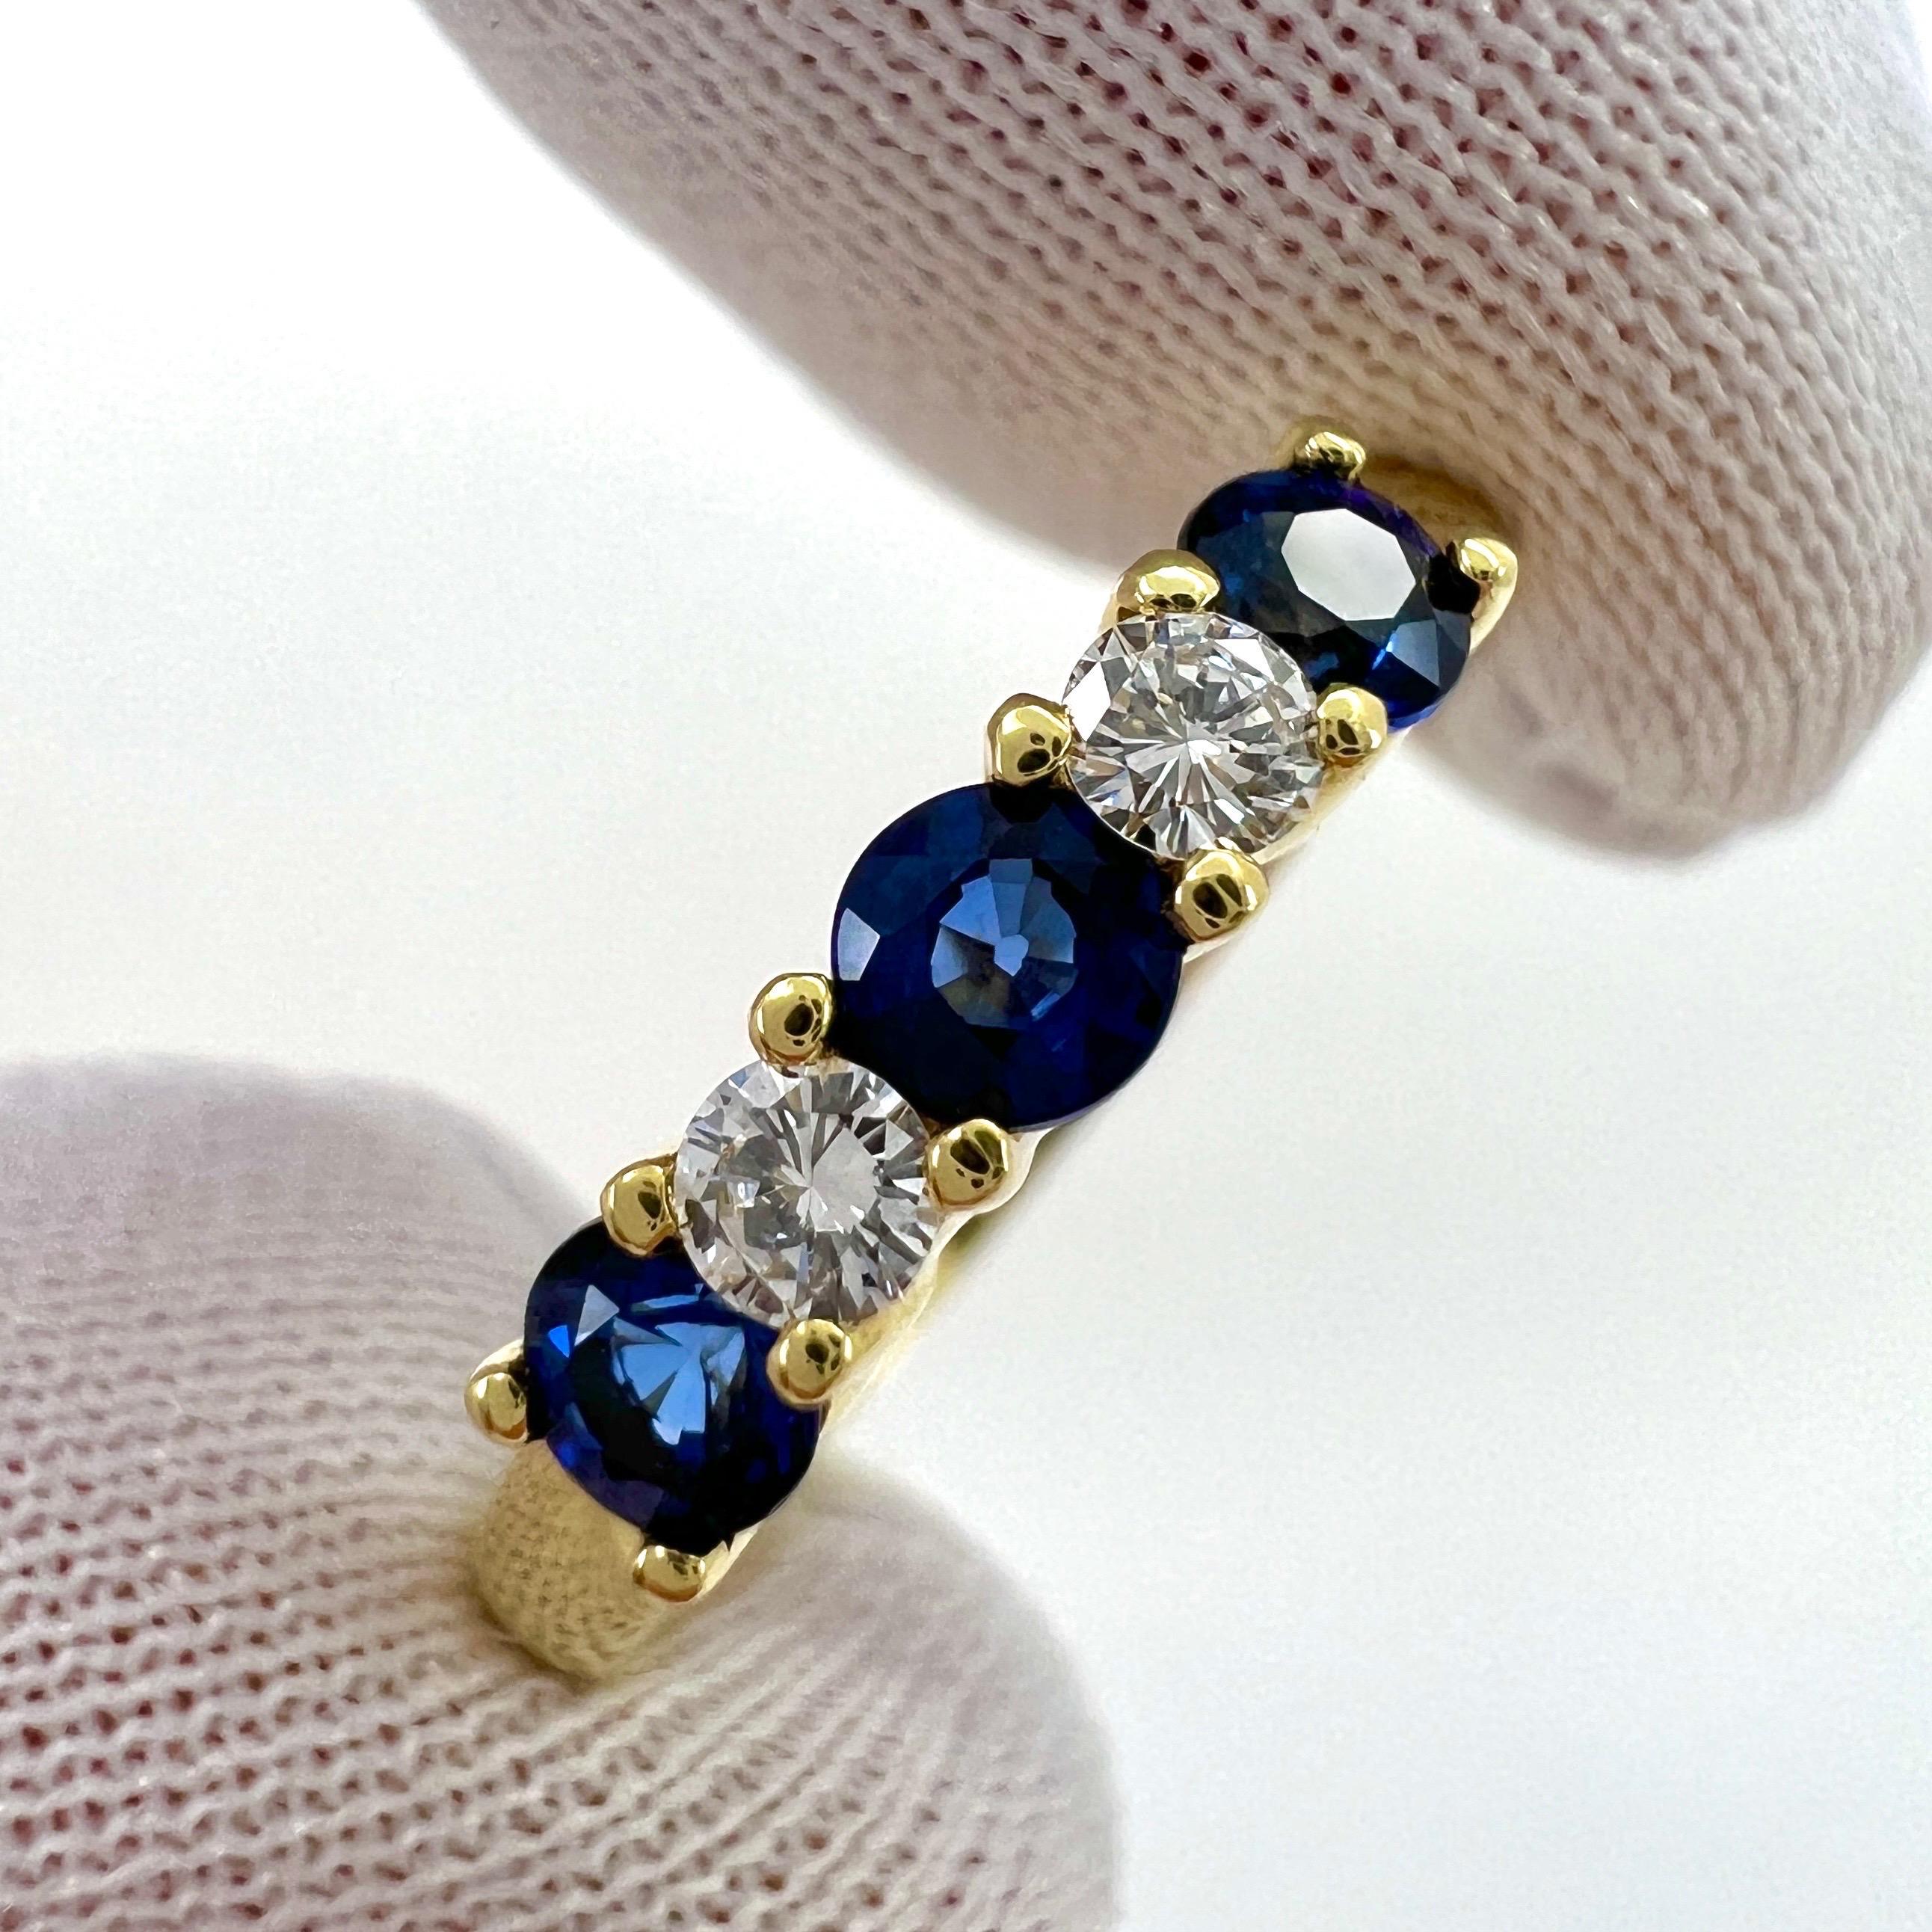 Tiffany & Co Fine Blue Sapphire & Diamond 18k Yellow Gold Five Stone Ring.

Stunning yellow gold ring set with x3 fine deep blue sapphires measuring 3mm and x2 round brilliant cut natural diamonds measuring 2.5mm.

Fine jewellery houses like Tiffany